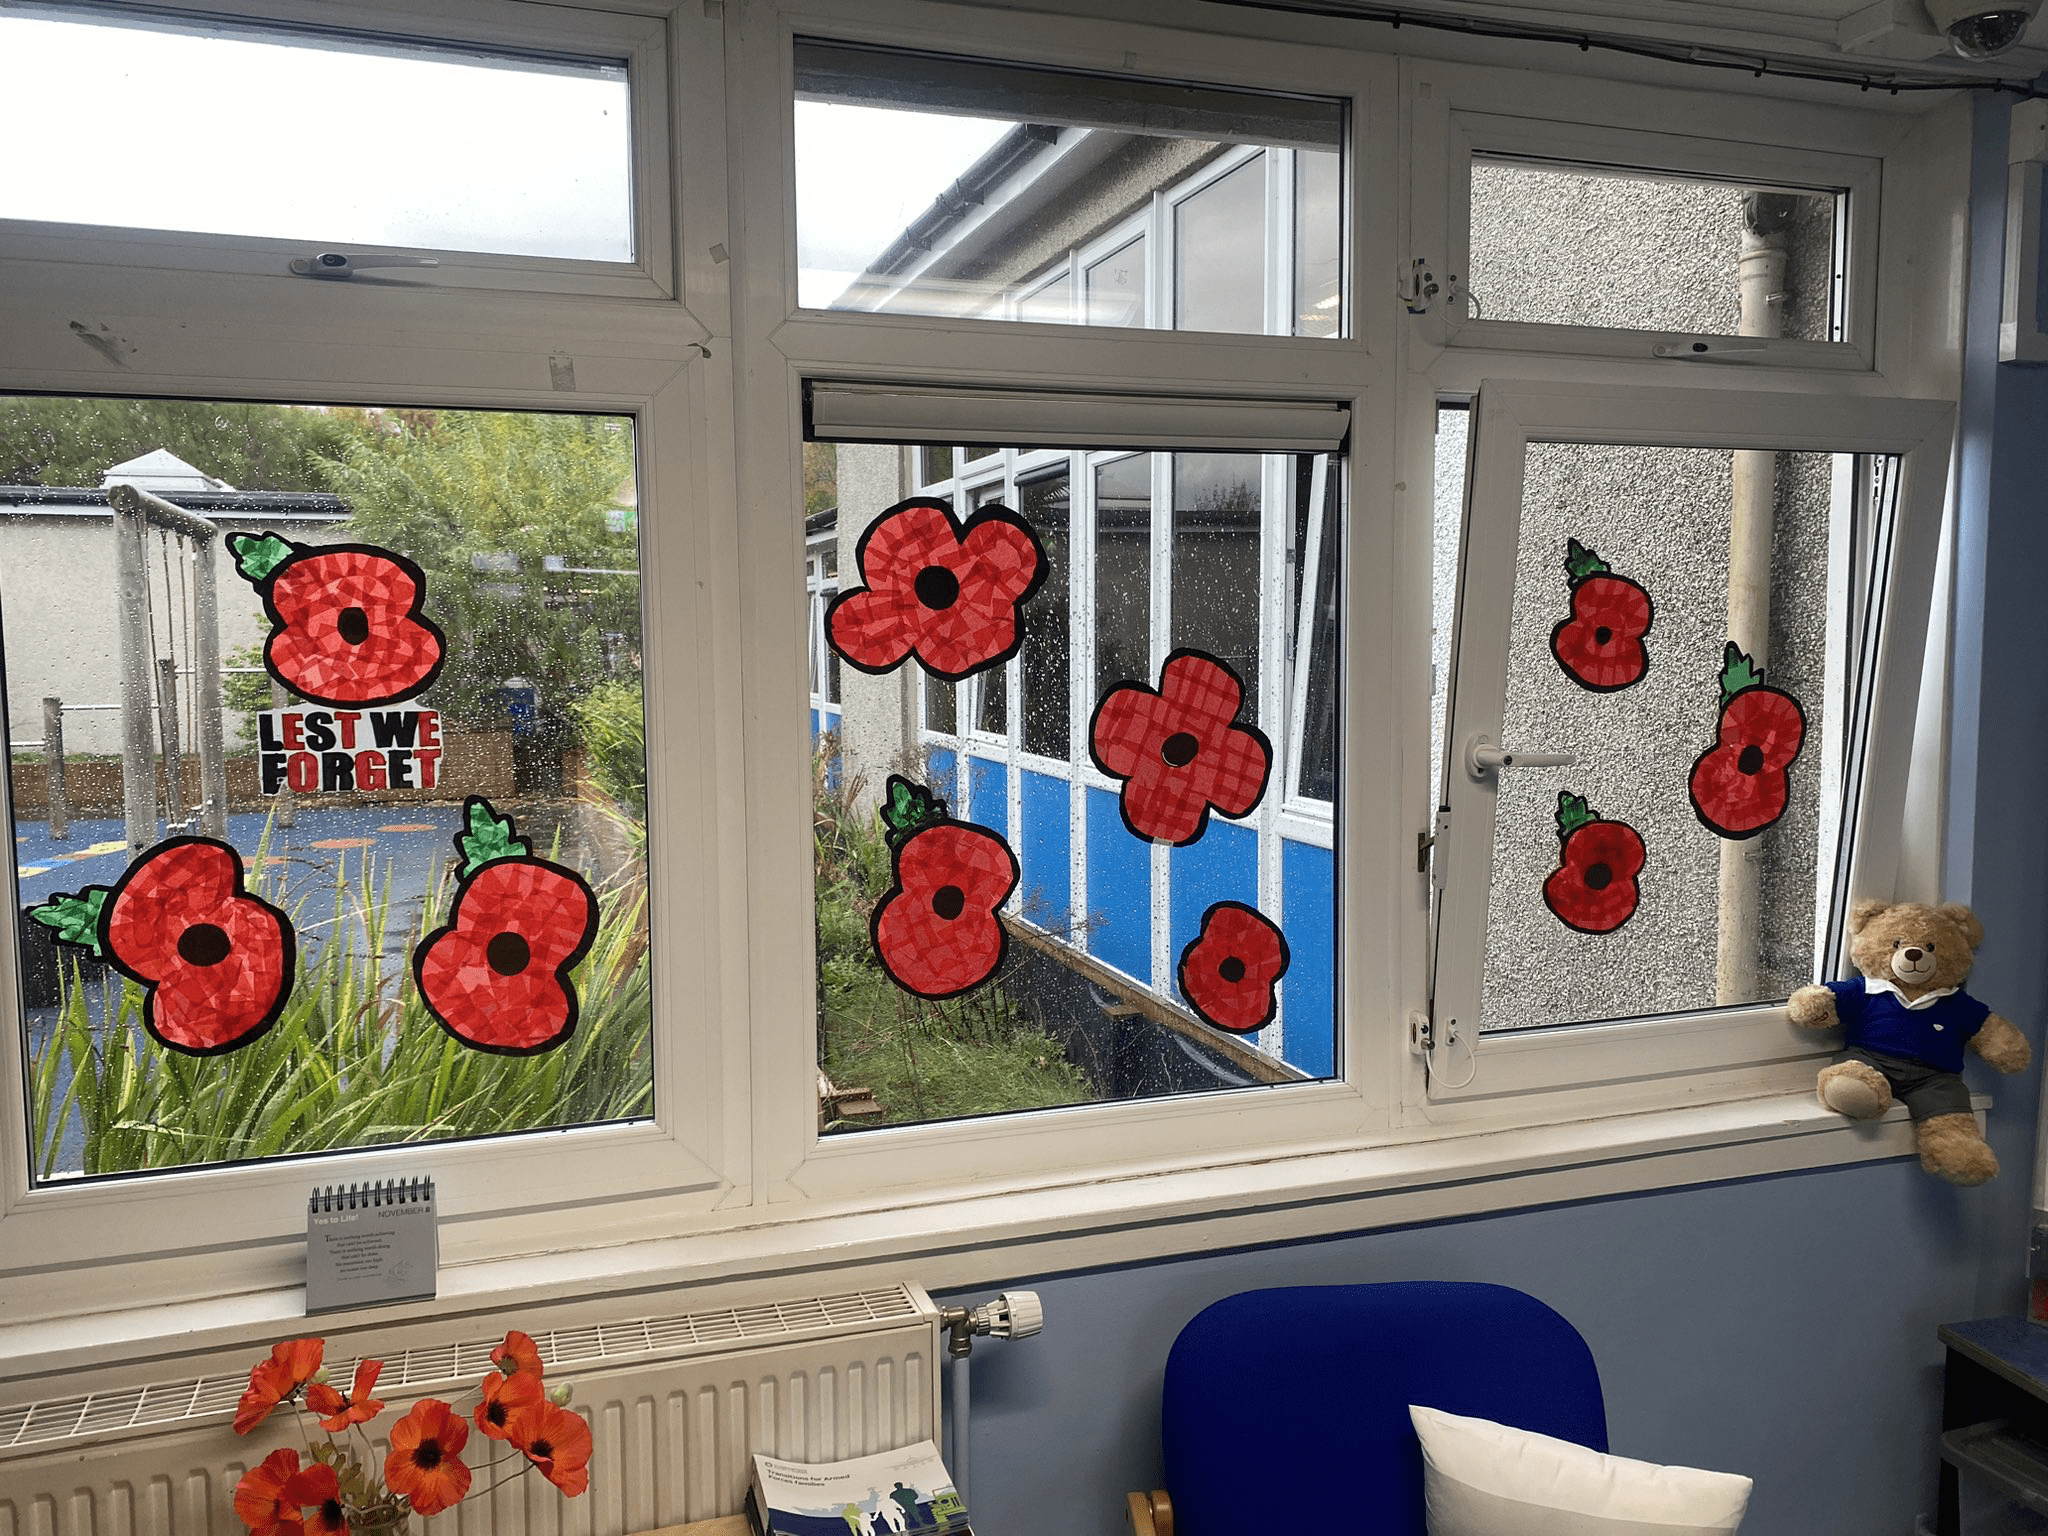 A number of hand drawn poppies are displayed on one of the school windows